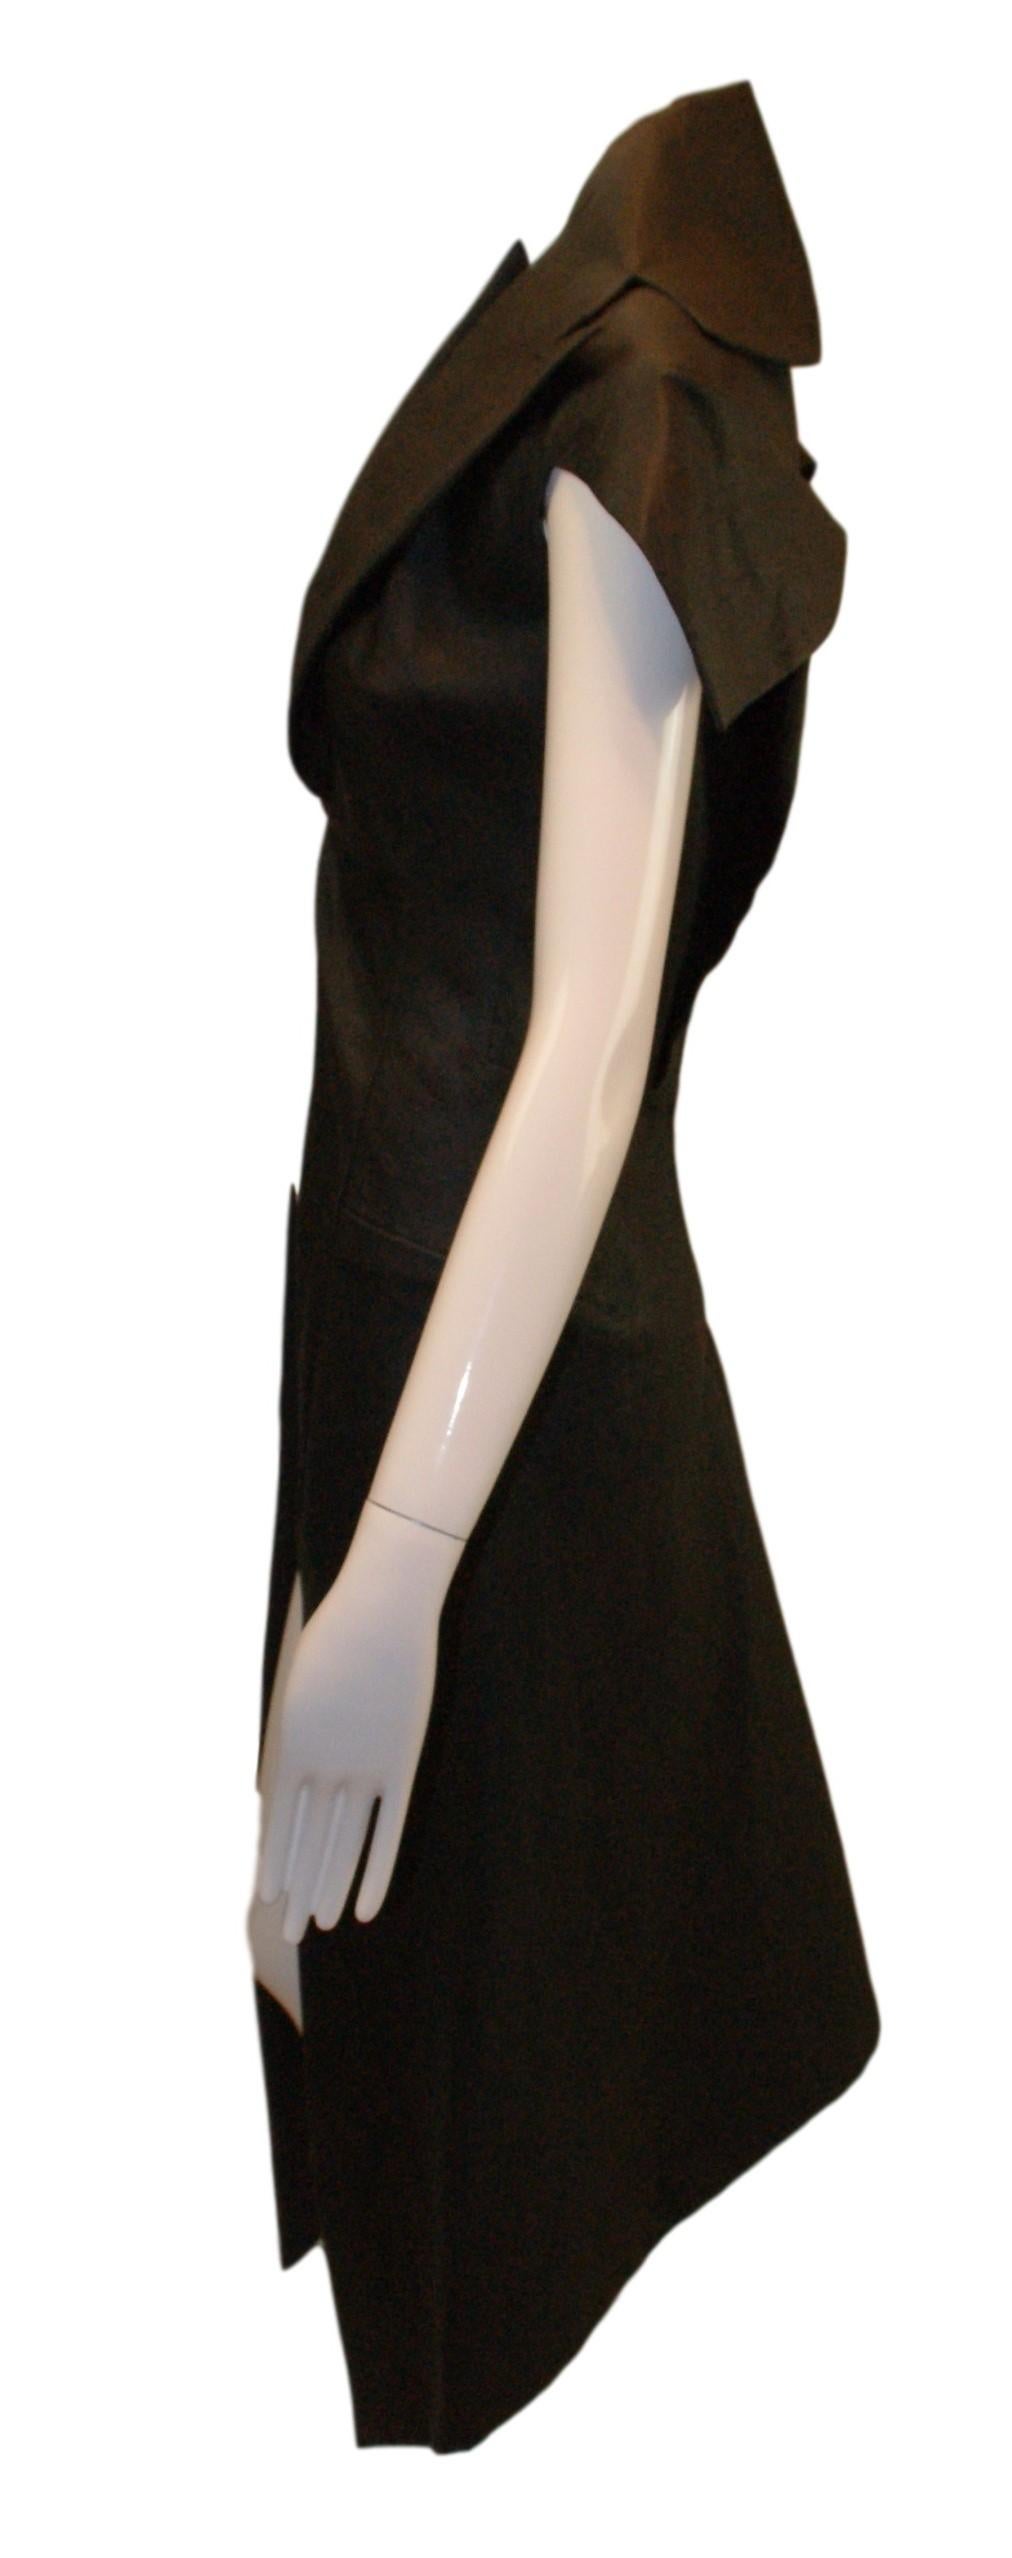 Alexander McQueen Museum Savage Beauty Untitled S/S 1999 Resin Black Coat Dress In Good Condition In Yukon, OK